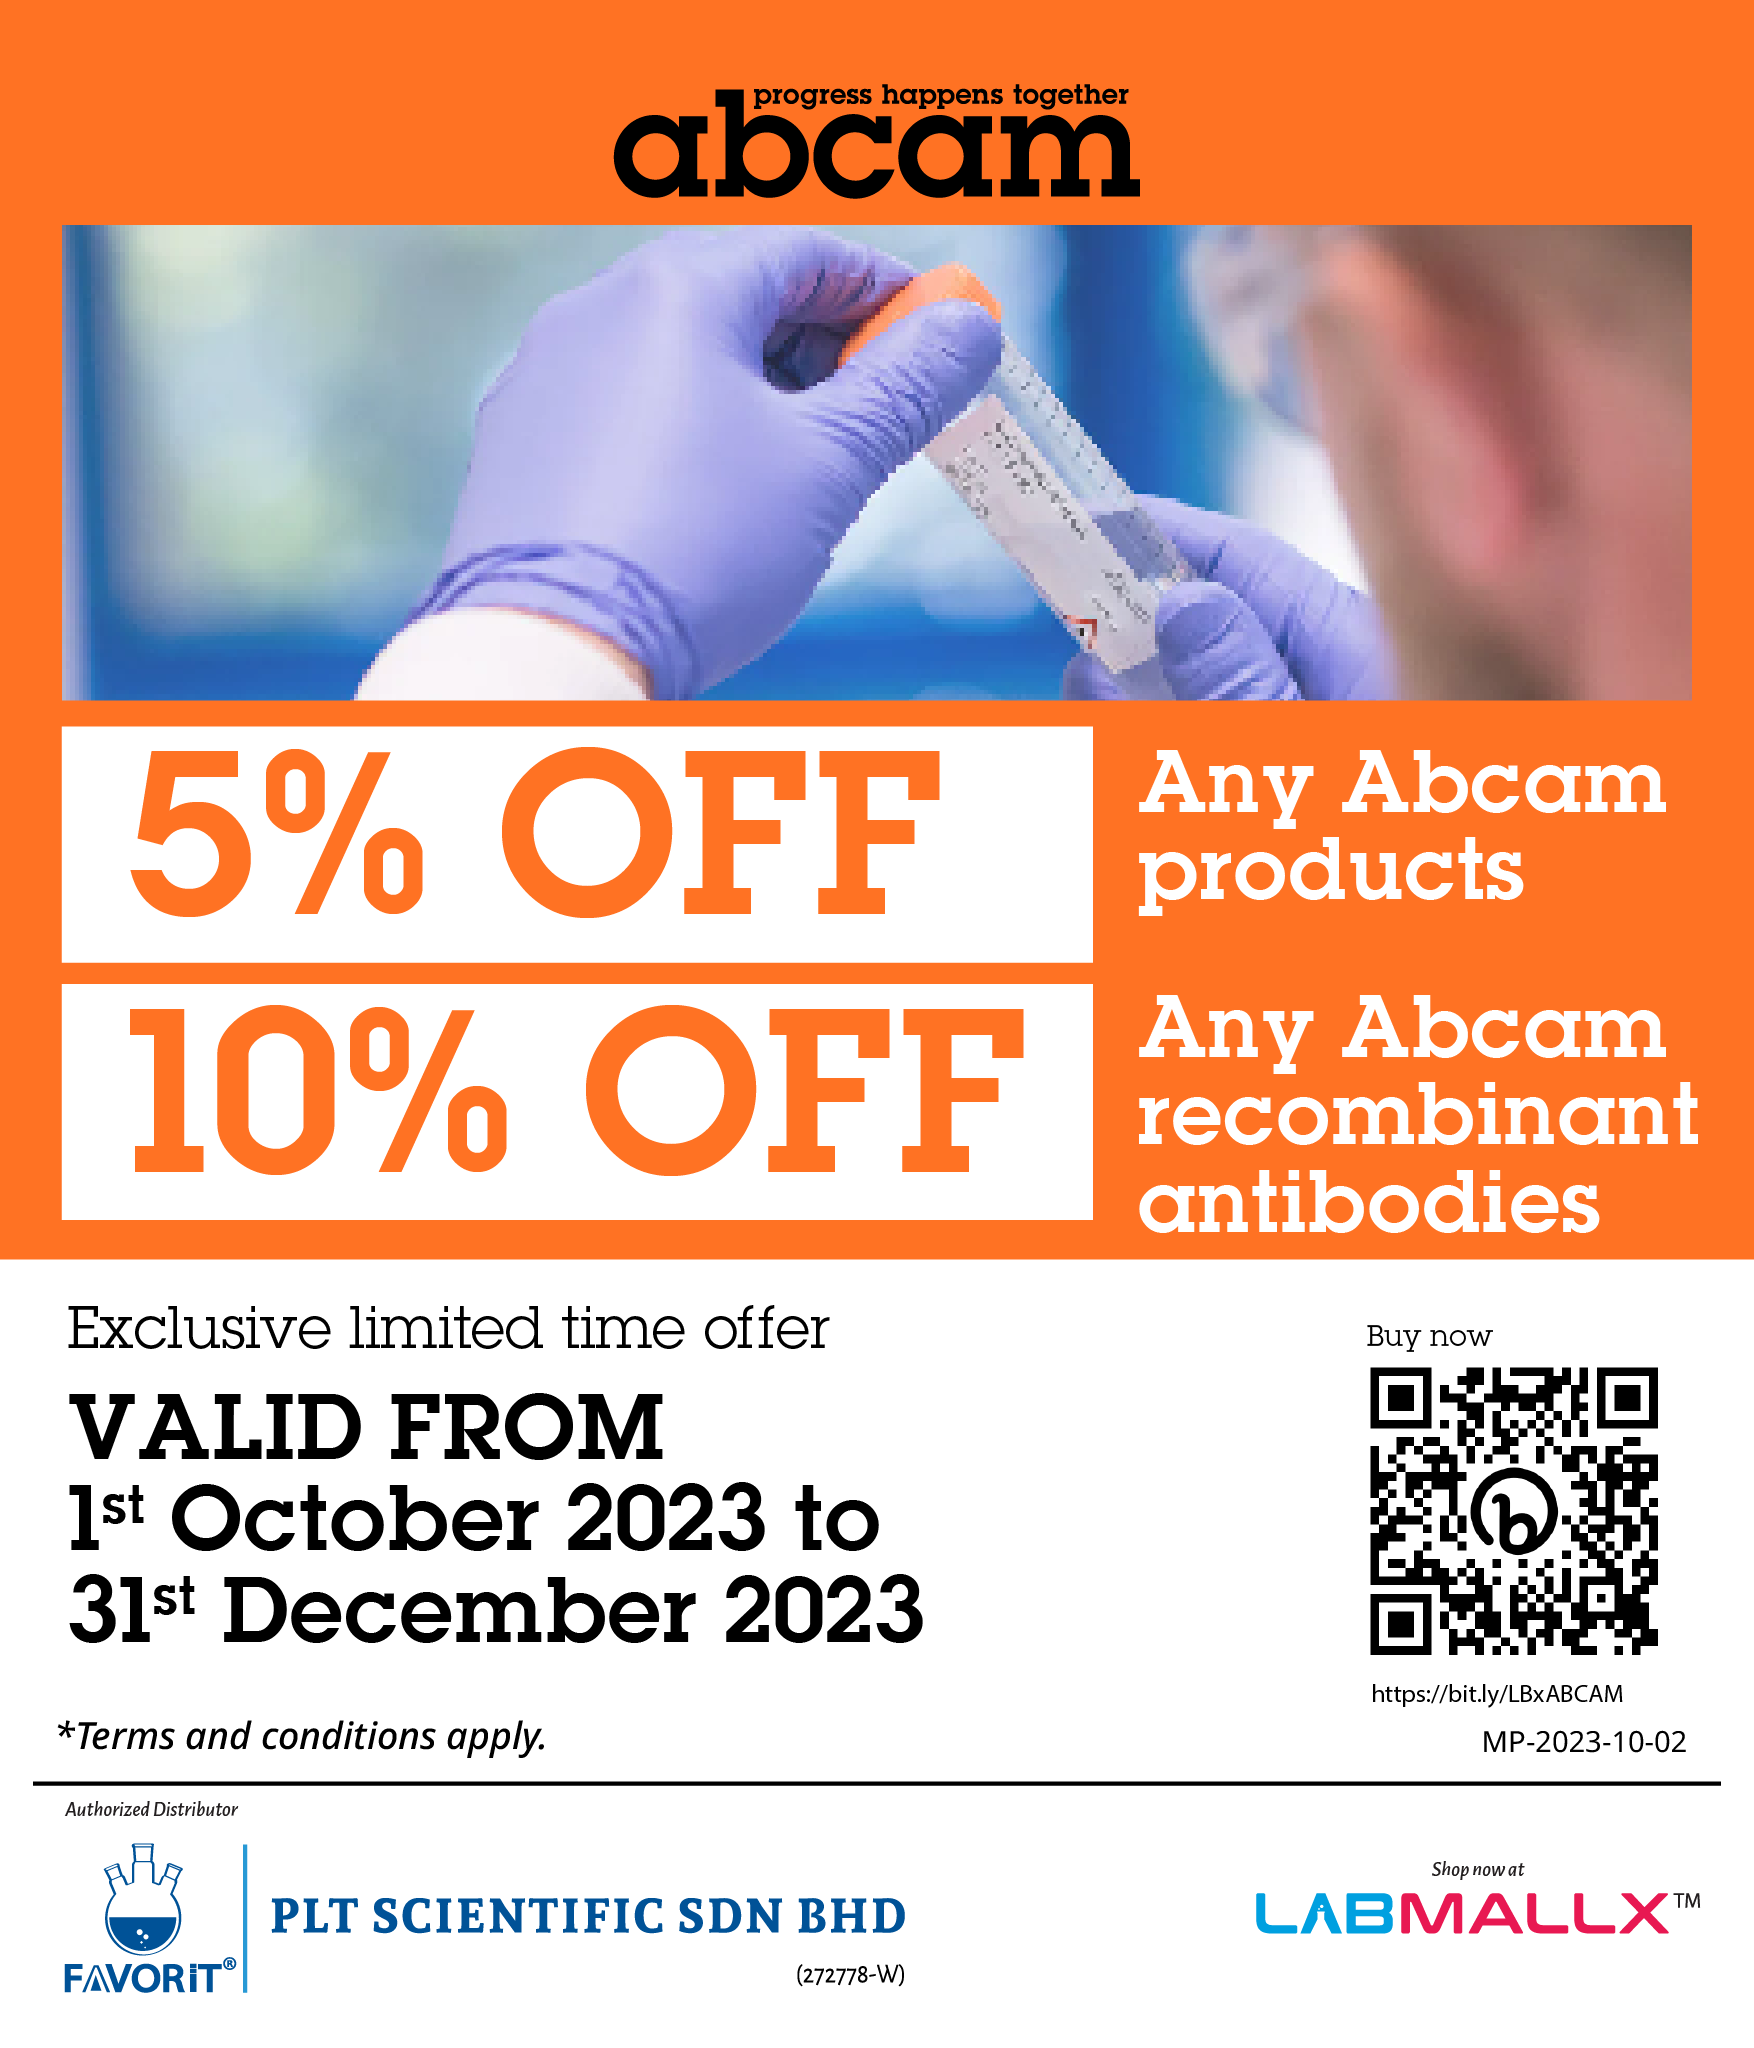 ABCAM: 5% off on Any Abcam Products & 10% off on any Abcam recombinant